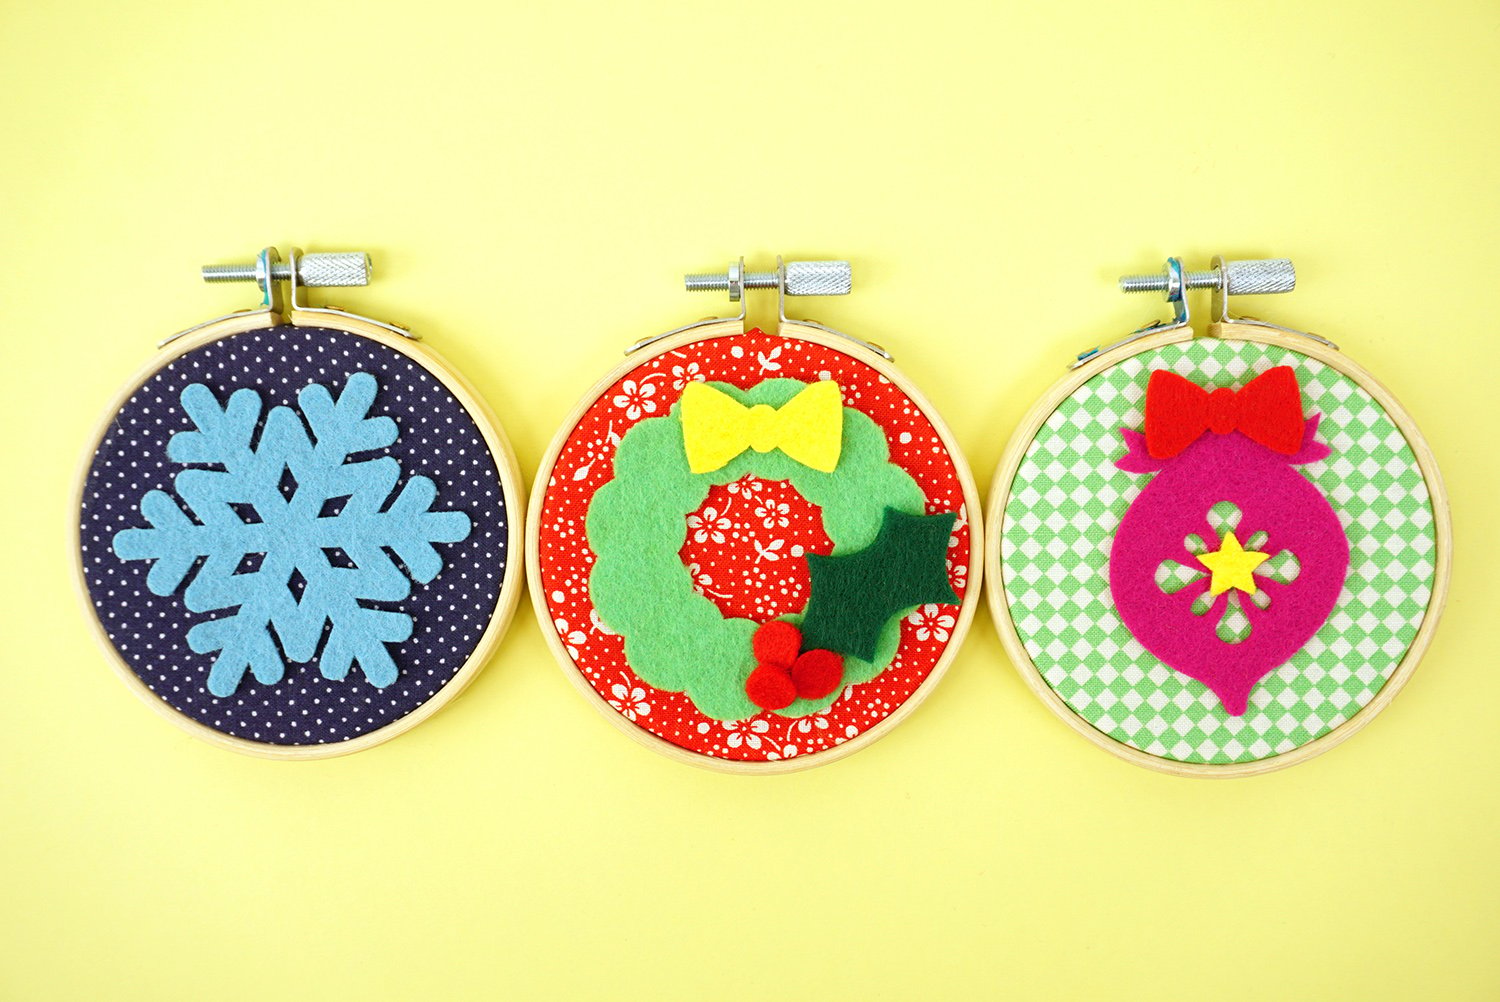 christmas cut out felt pieces adhered to embroidery hoop designs